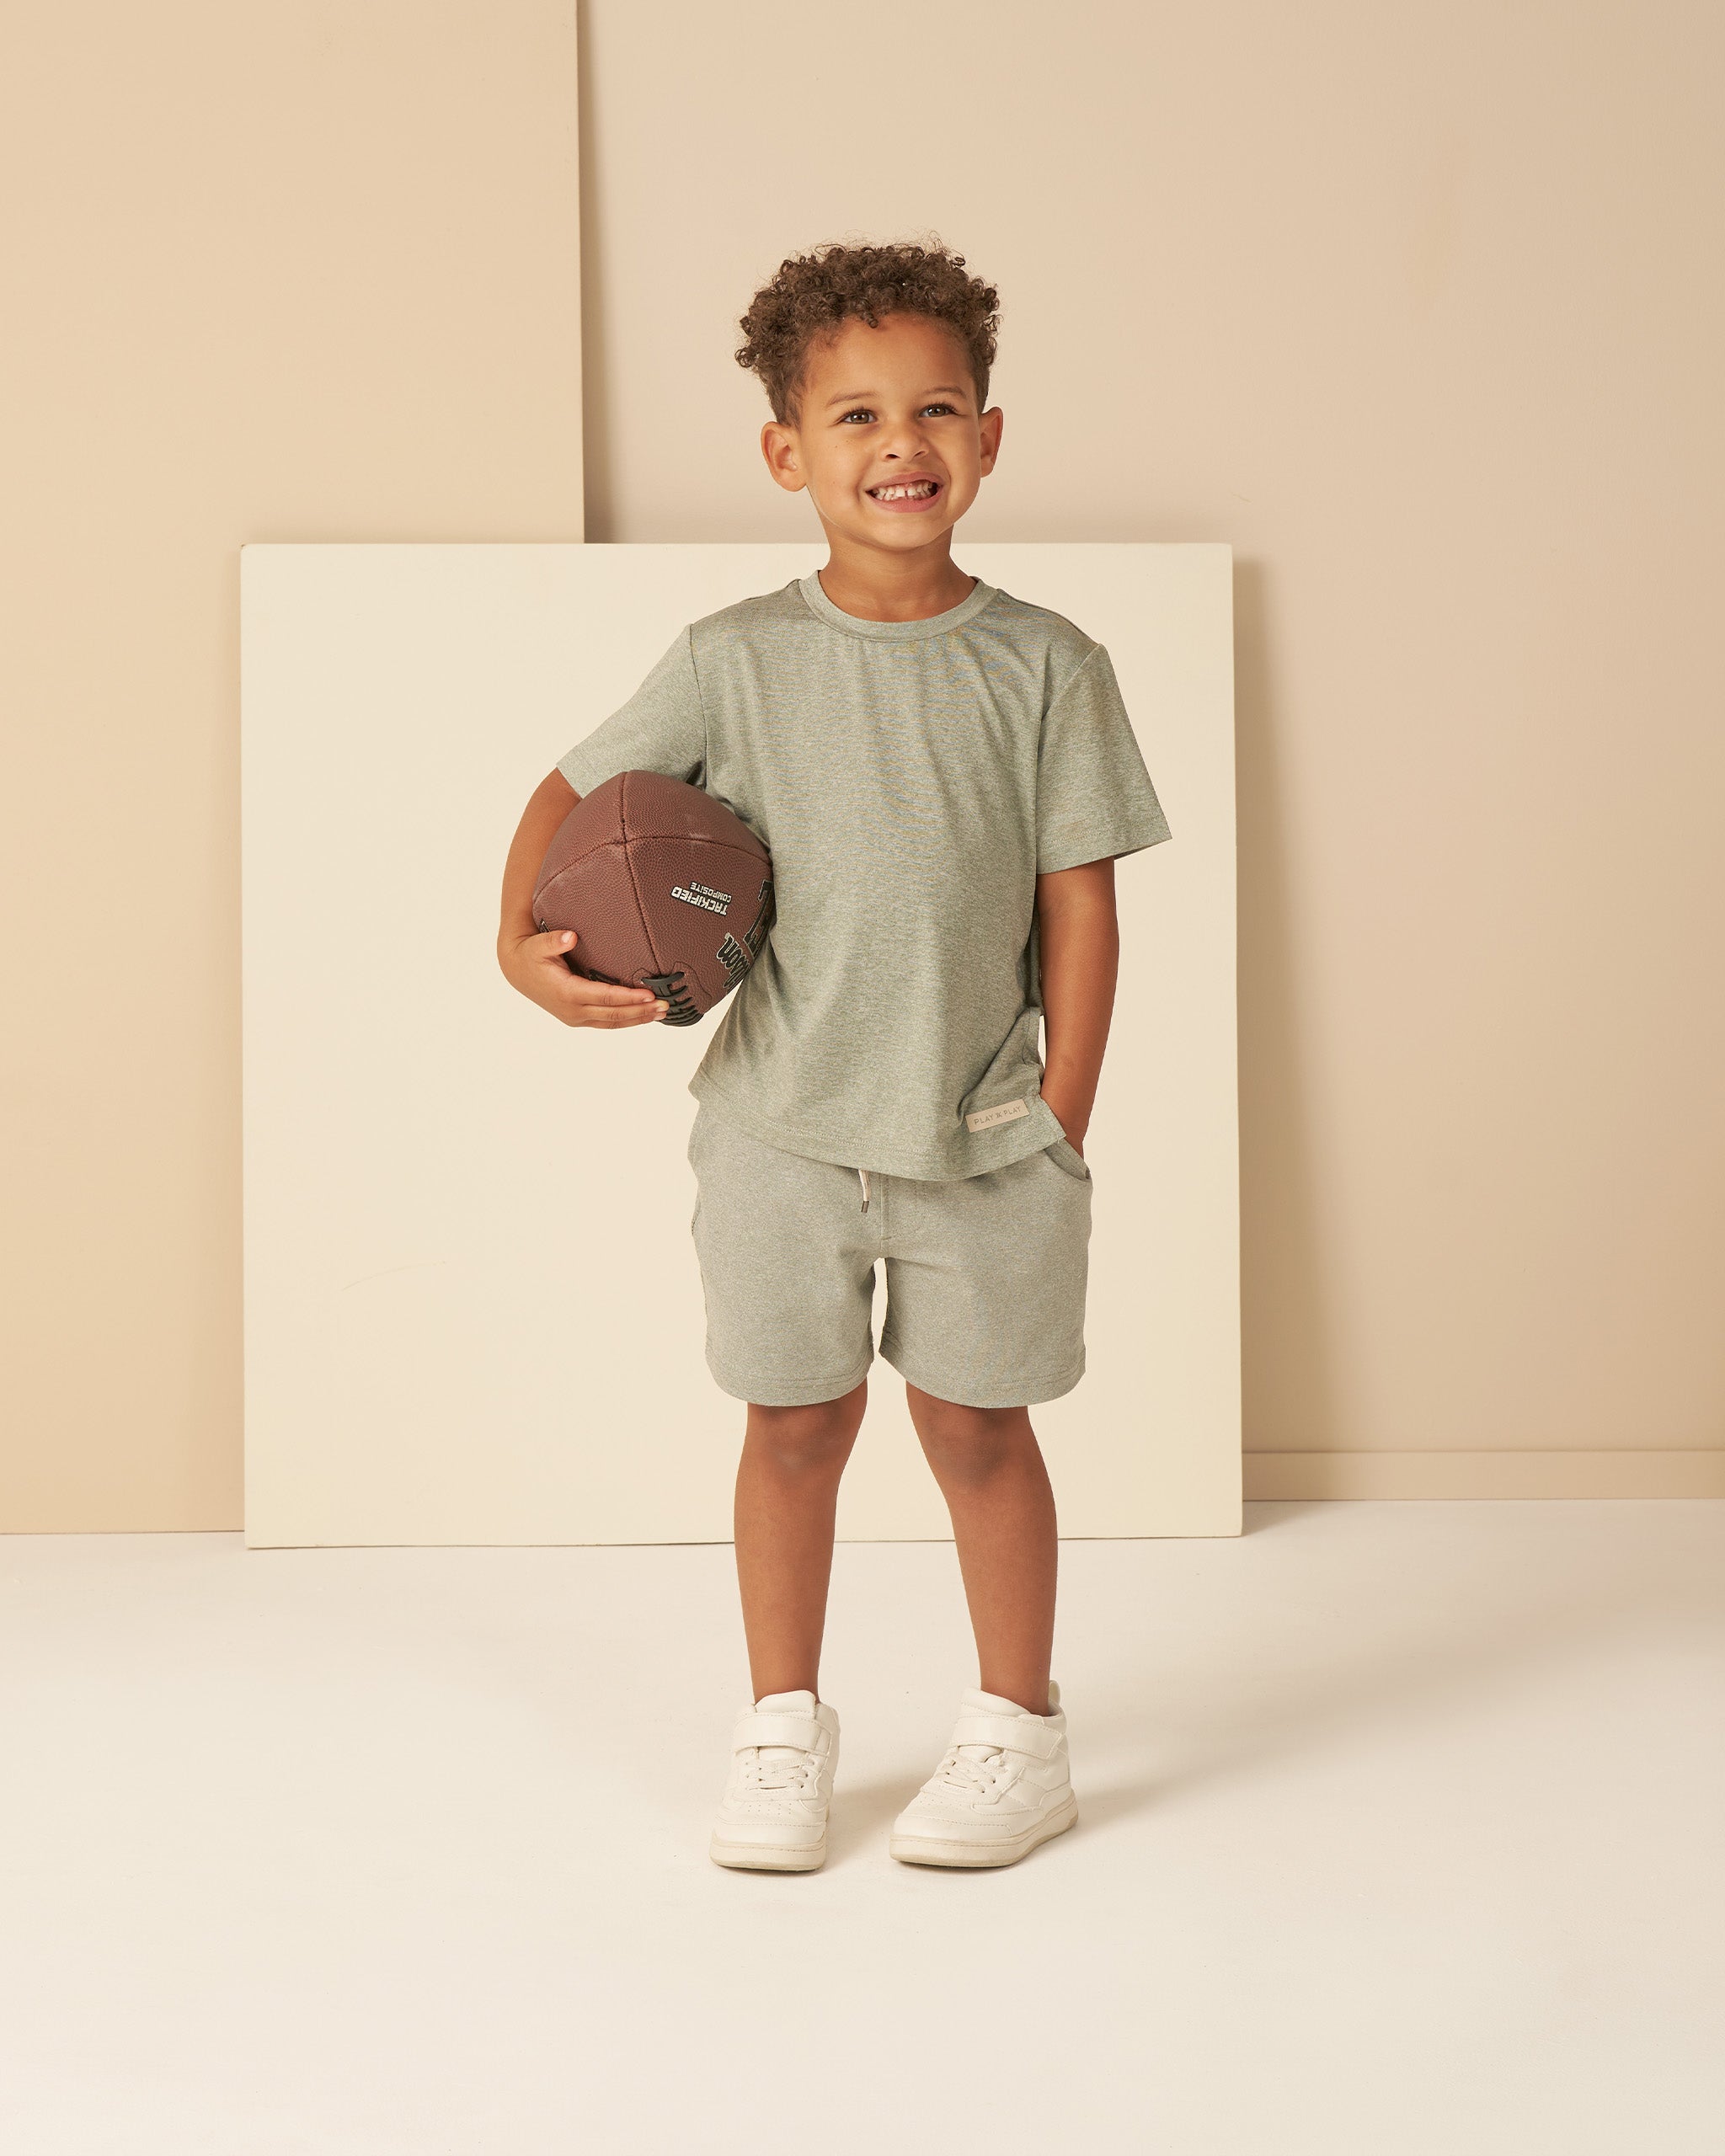 Cove Essential Tee || Heathered Aqua - Rylee + Cru | Kids Clothes | Trendy Baby Clothes | Modern Infant Outfits |